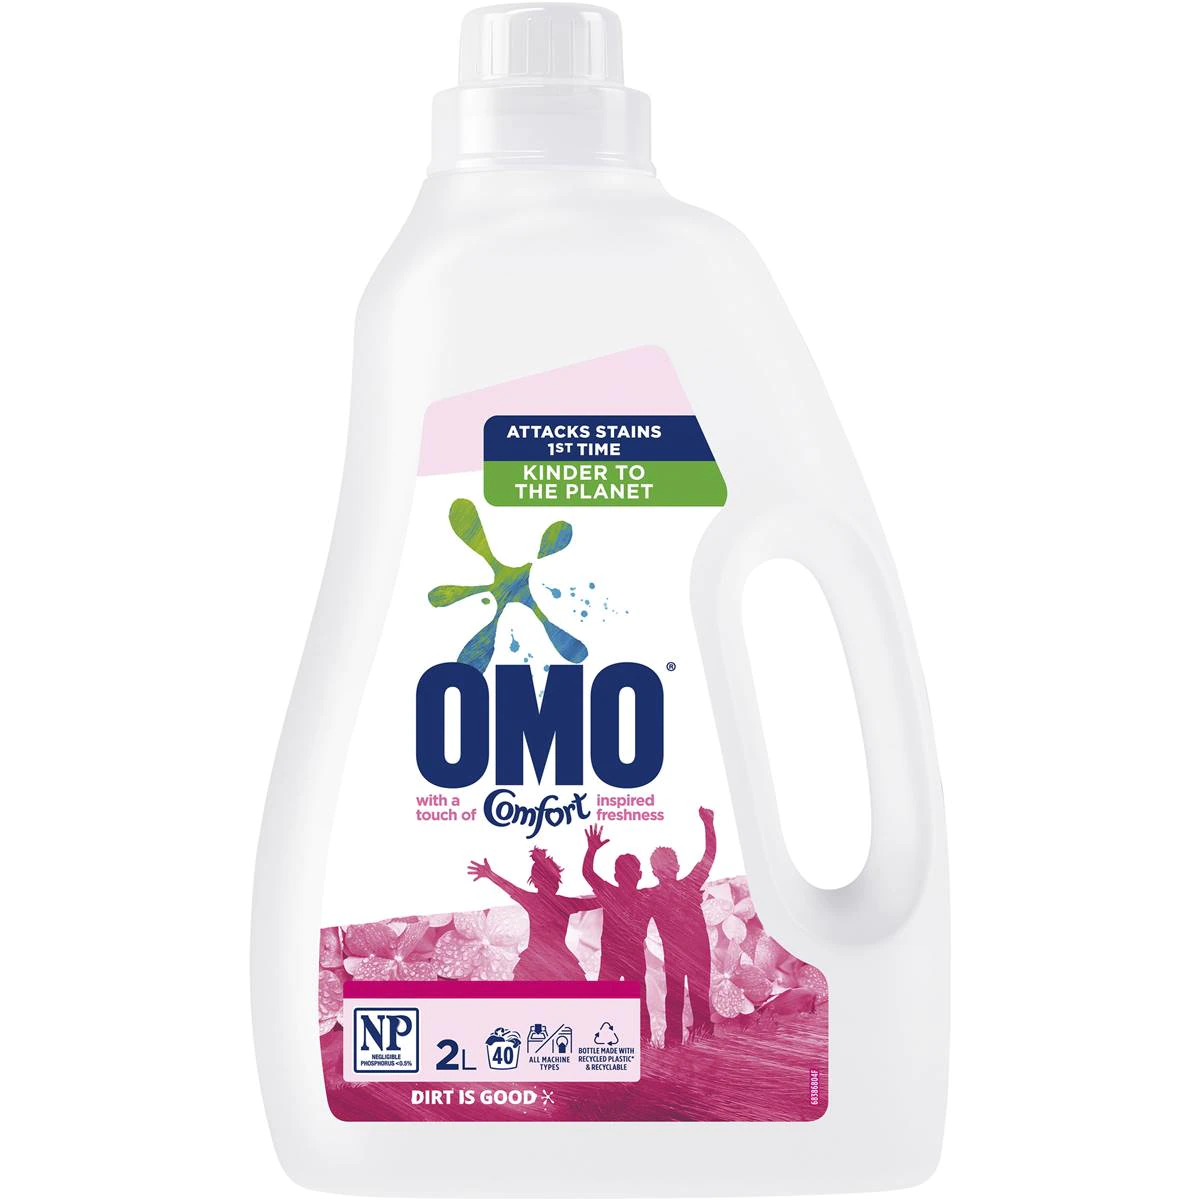 Omo Laundry Liquid Touch of Comfort 2 litre